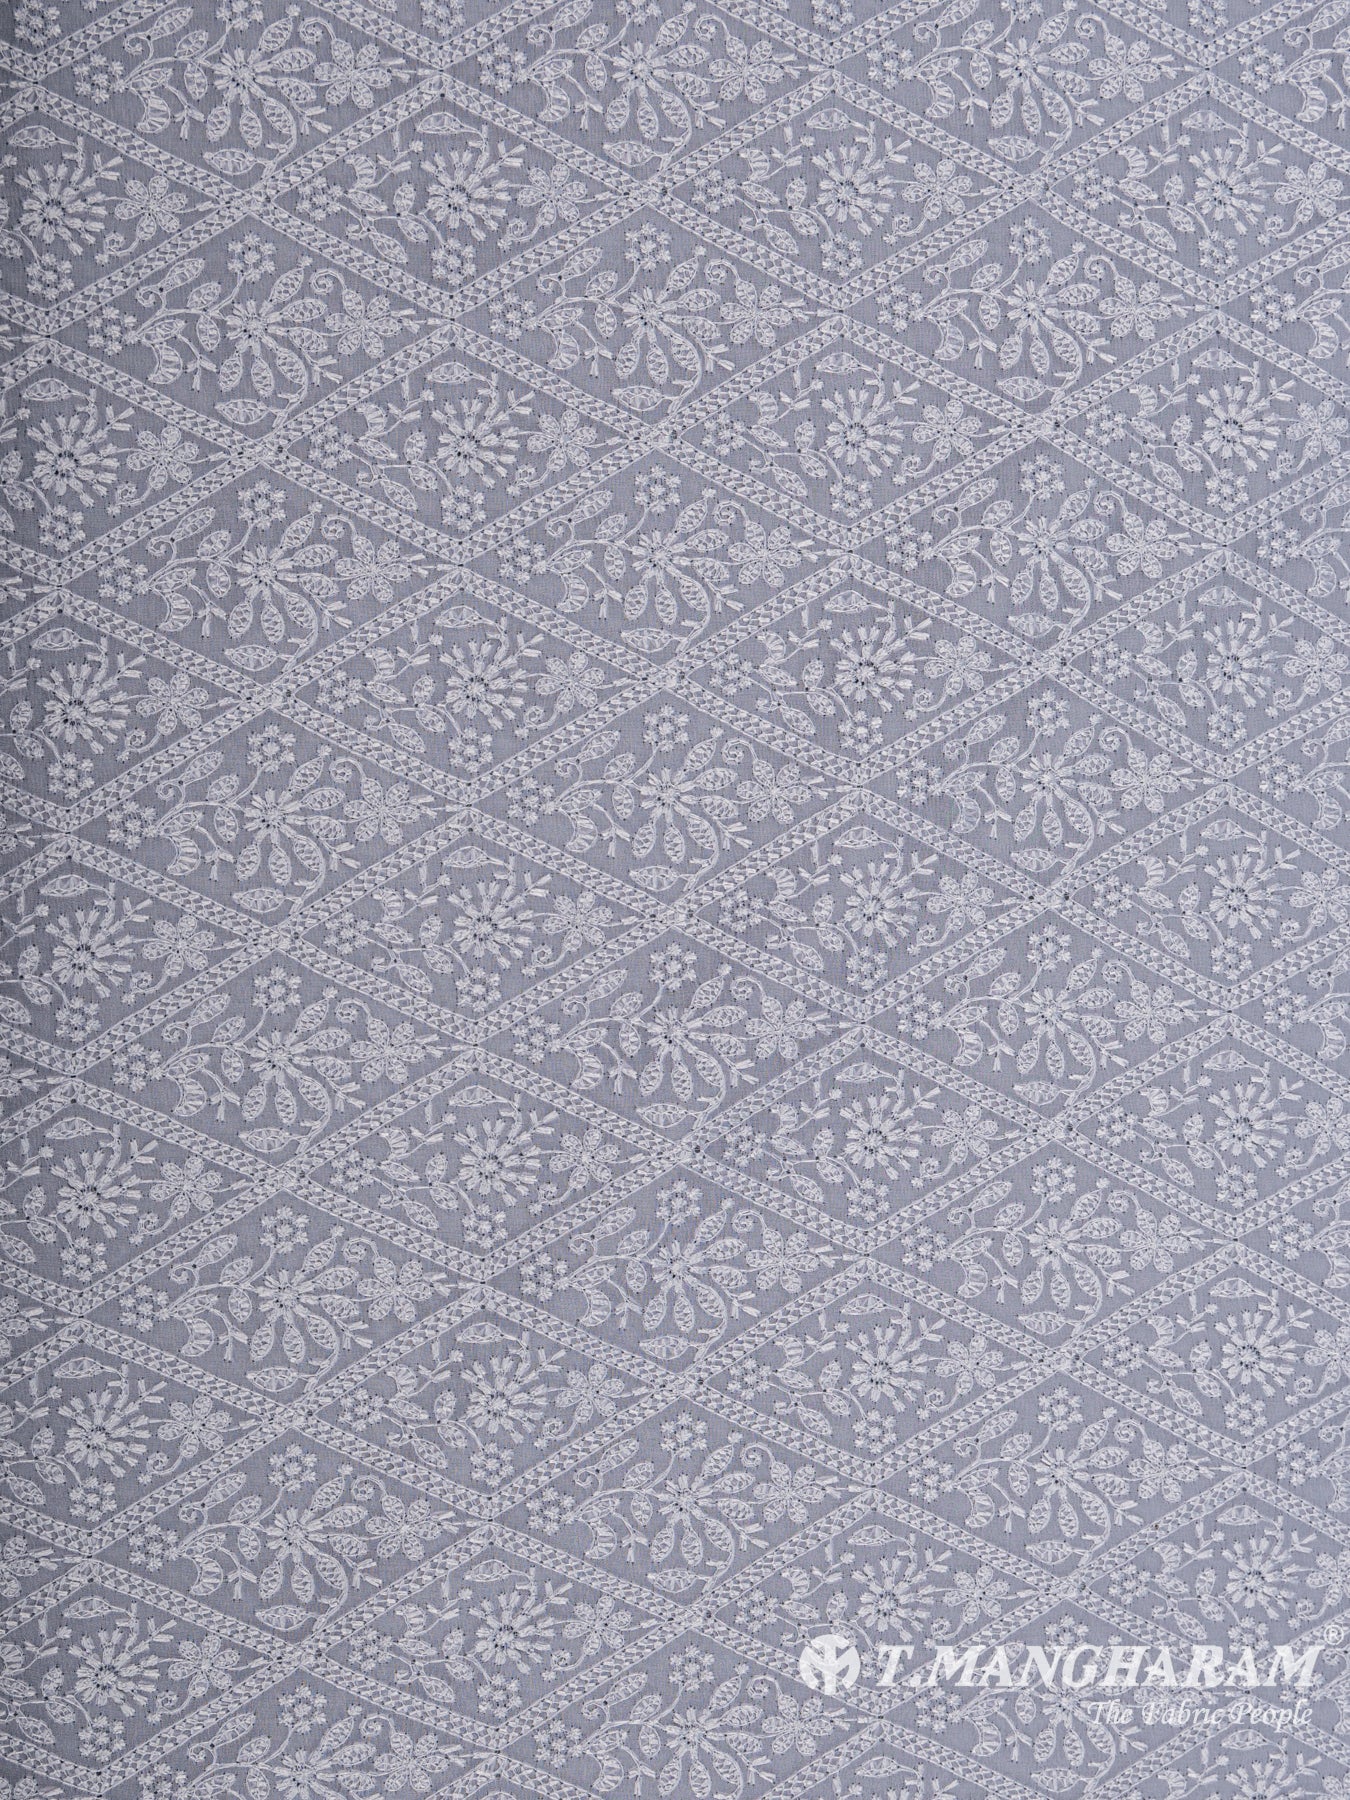 Grey Georgette Embroidery Fabric - EC6535 view-3